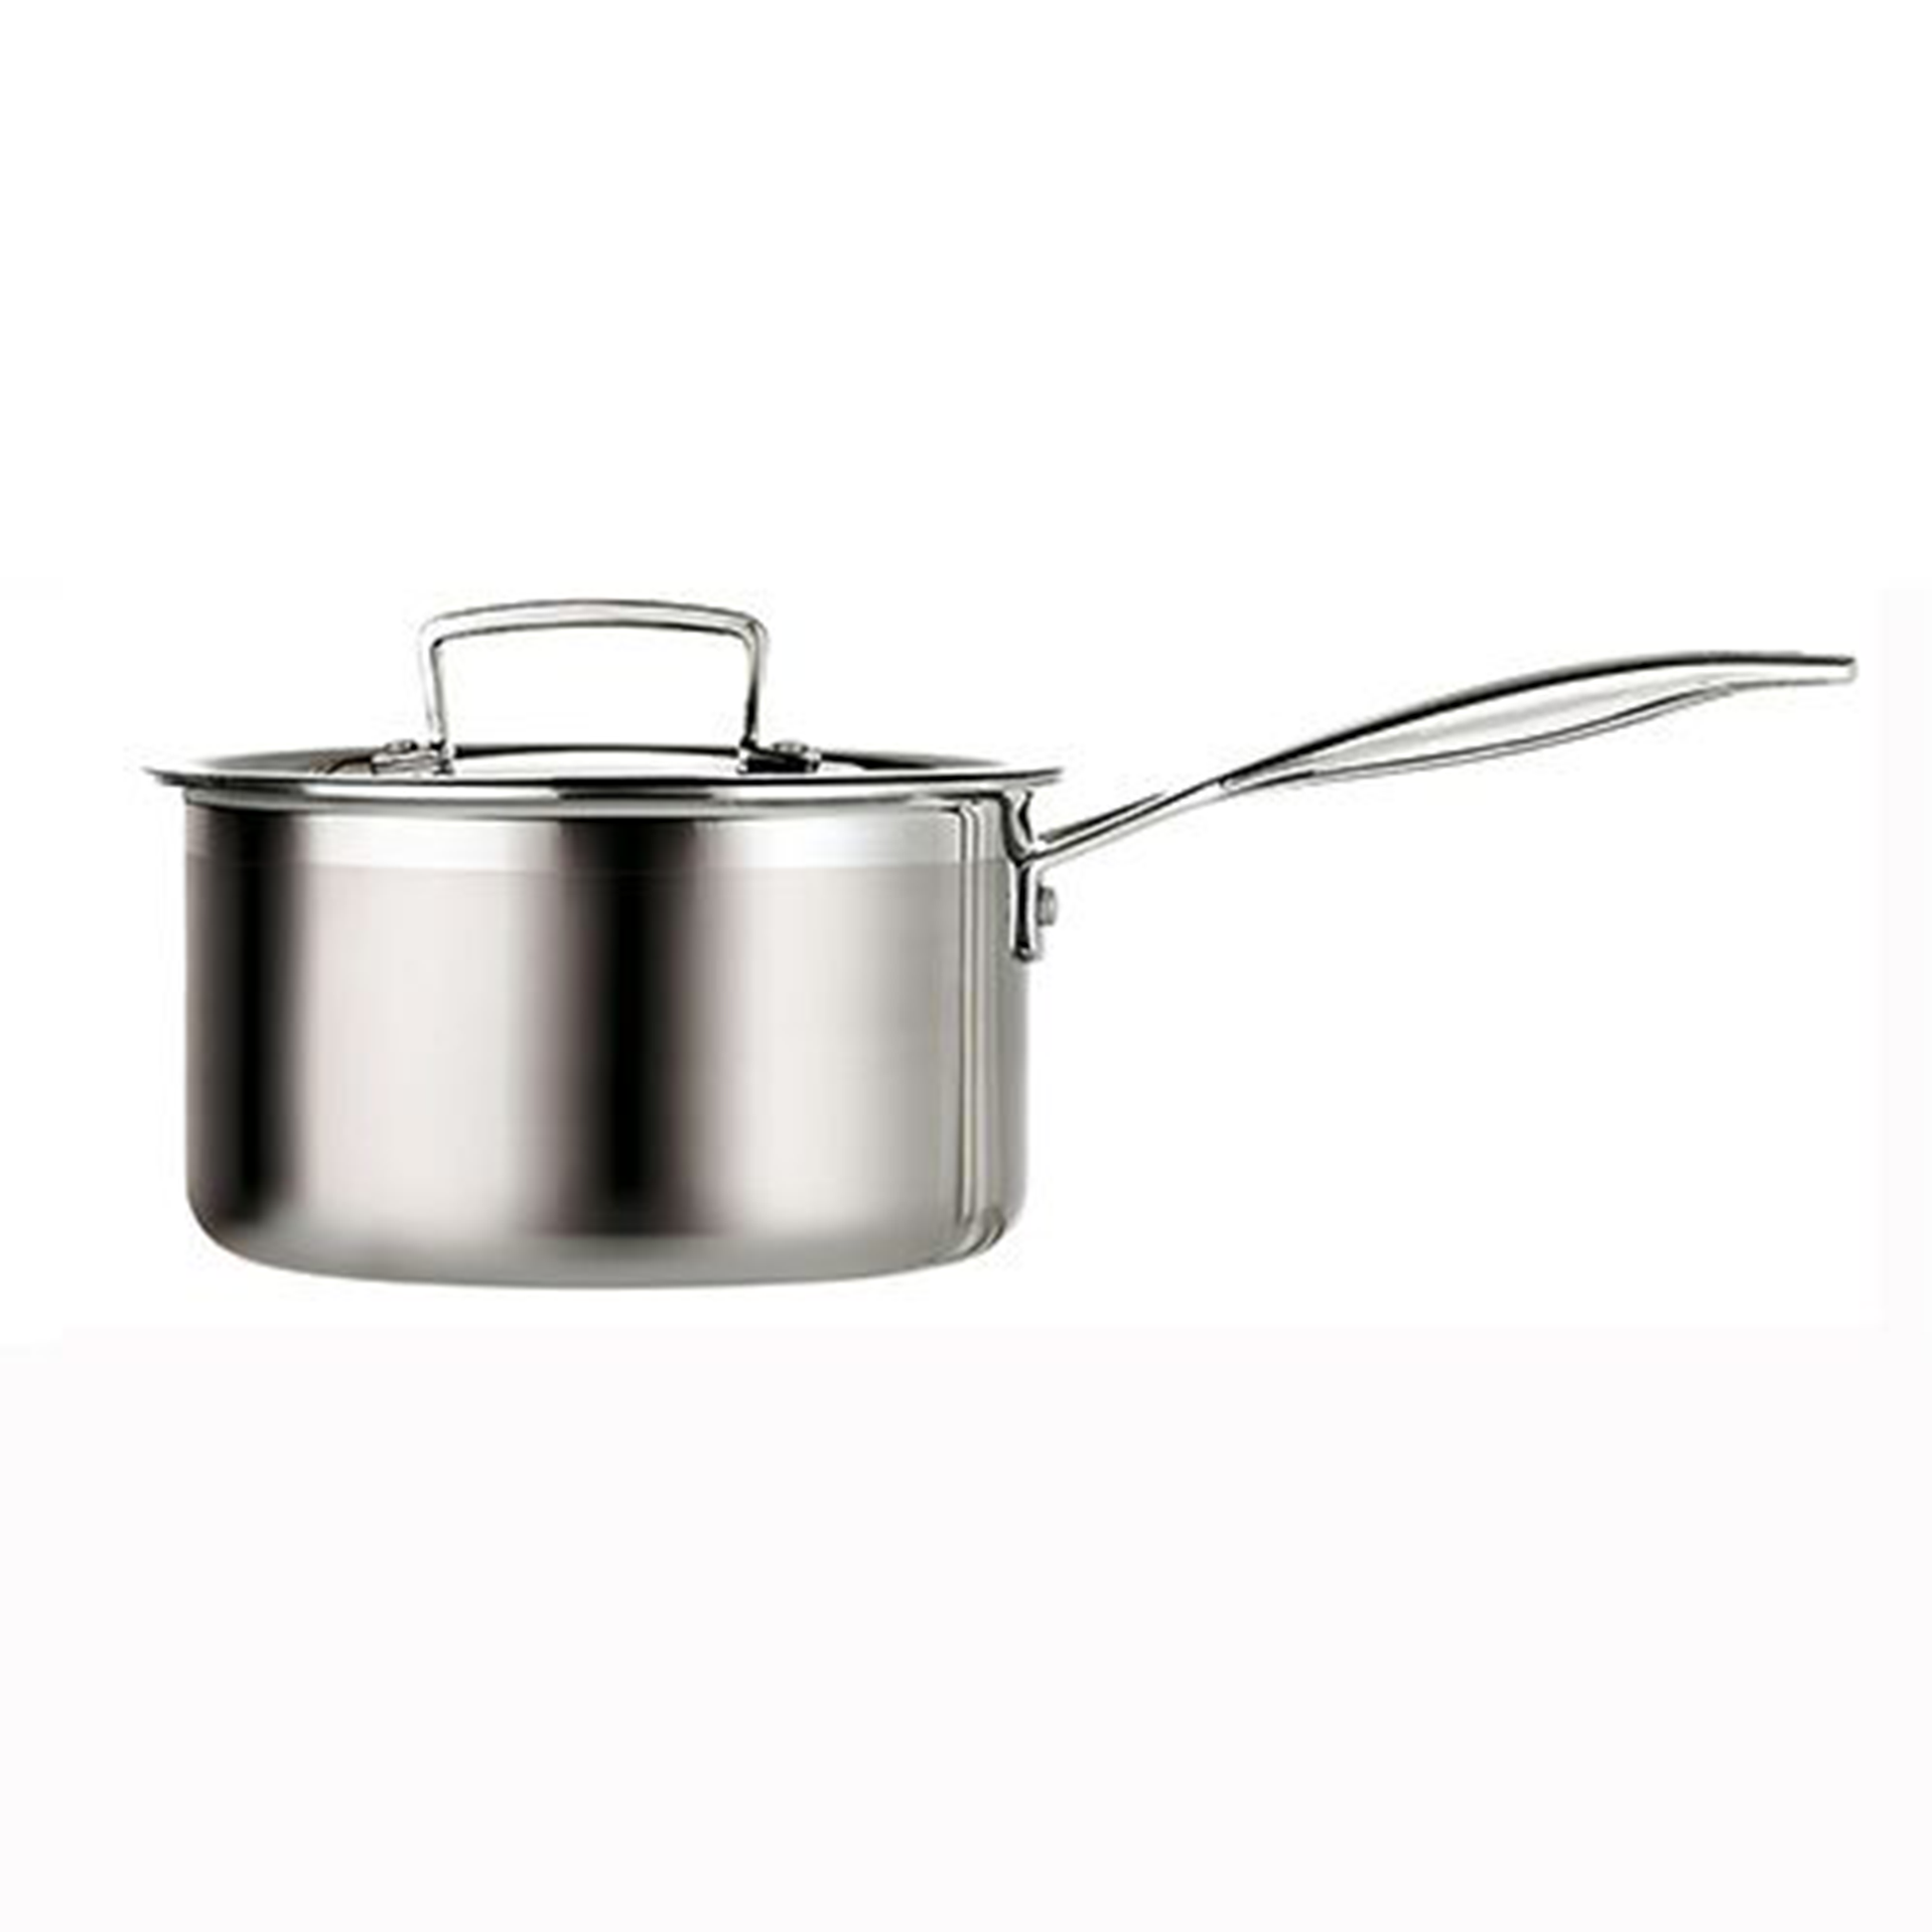 a side shot of the small saucepan